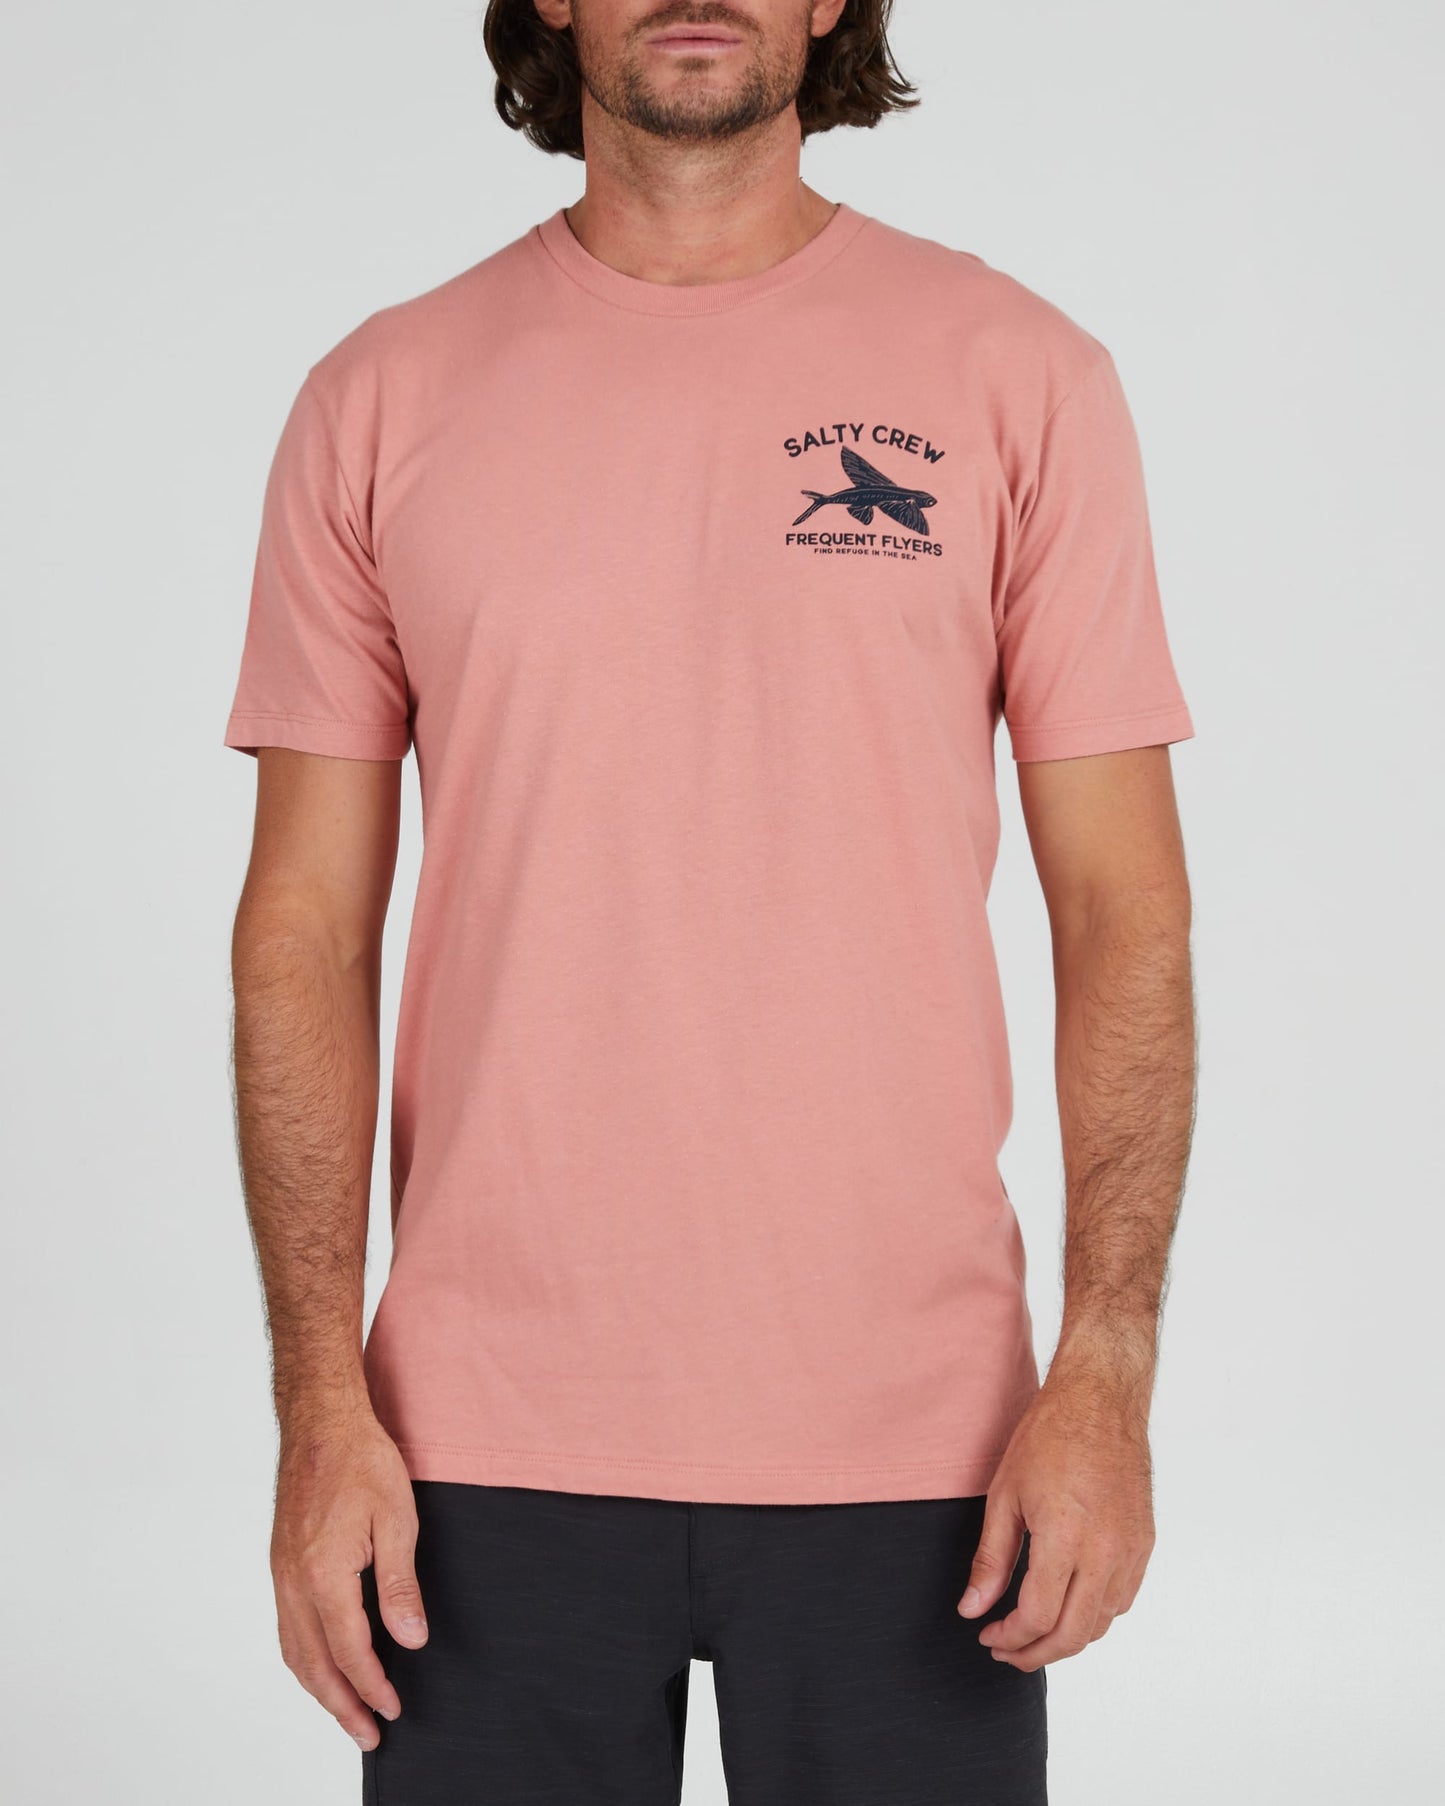 Salty crew T-SHIRTS S/S FREQUENT FLYER PREMIUM S/S TEE - Coral in Coral